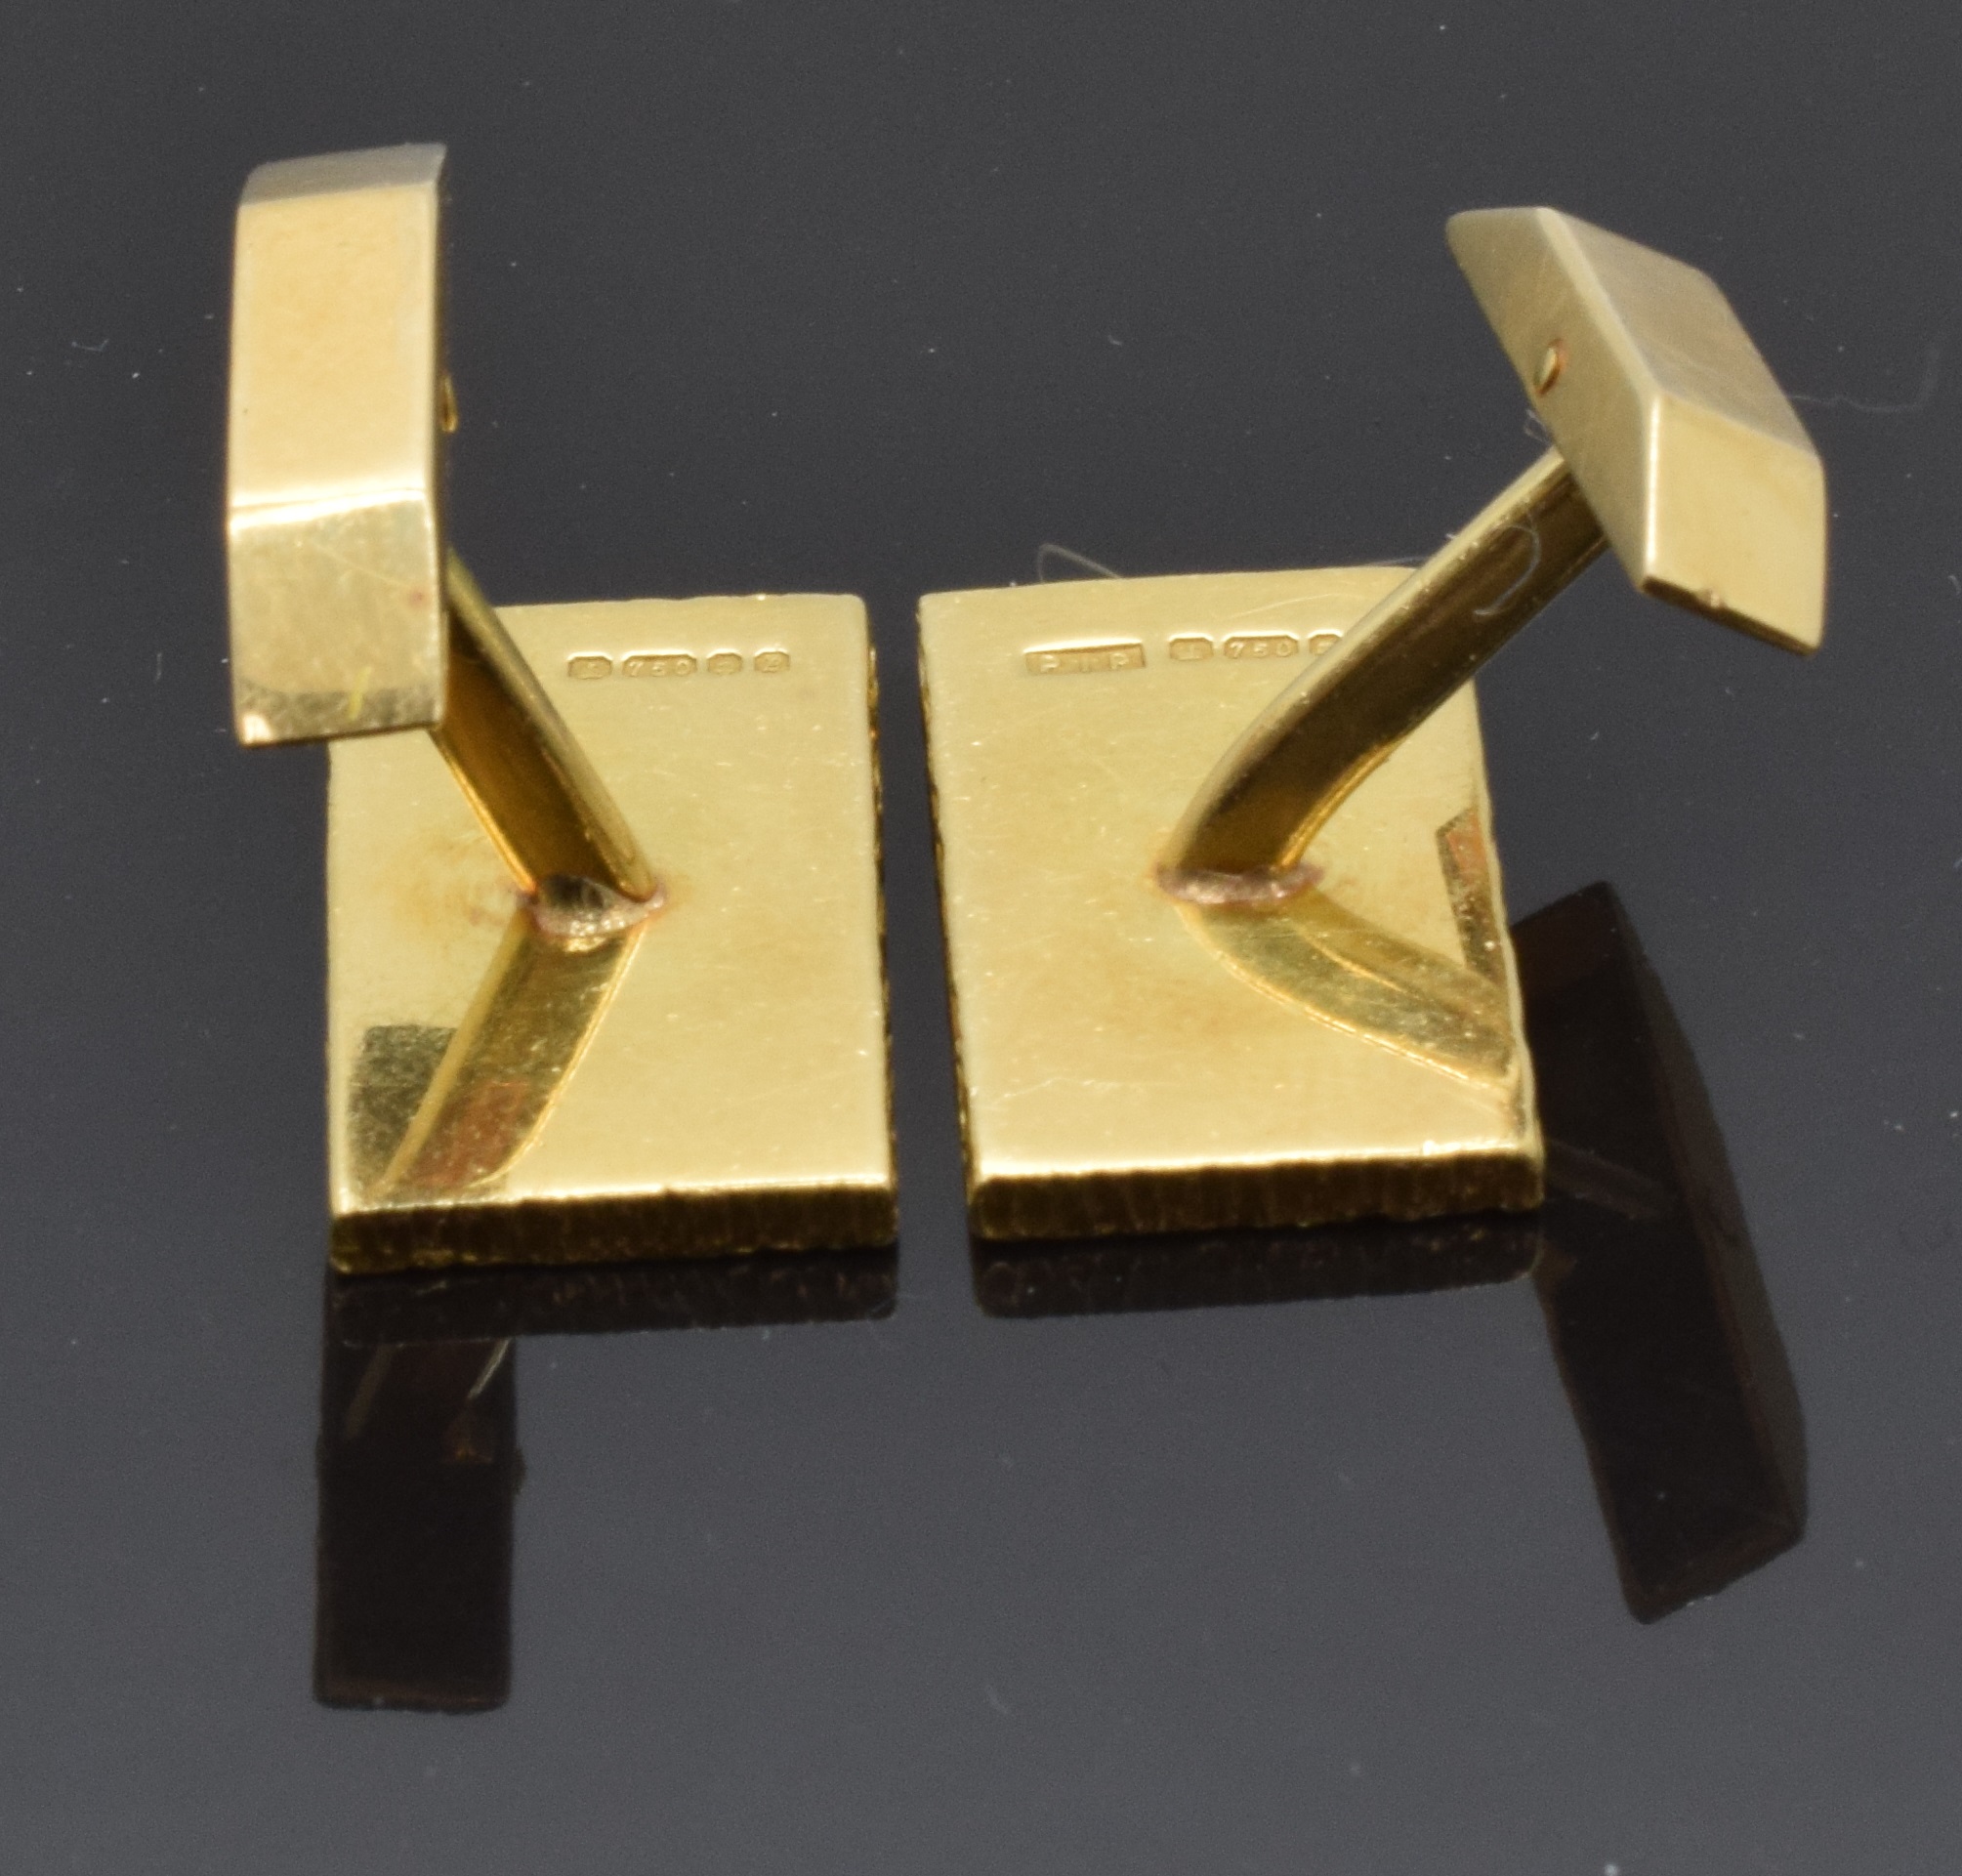 A pair of 18ct gold cufflinks with textured detail, 21.4g - Image 2 of 2